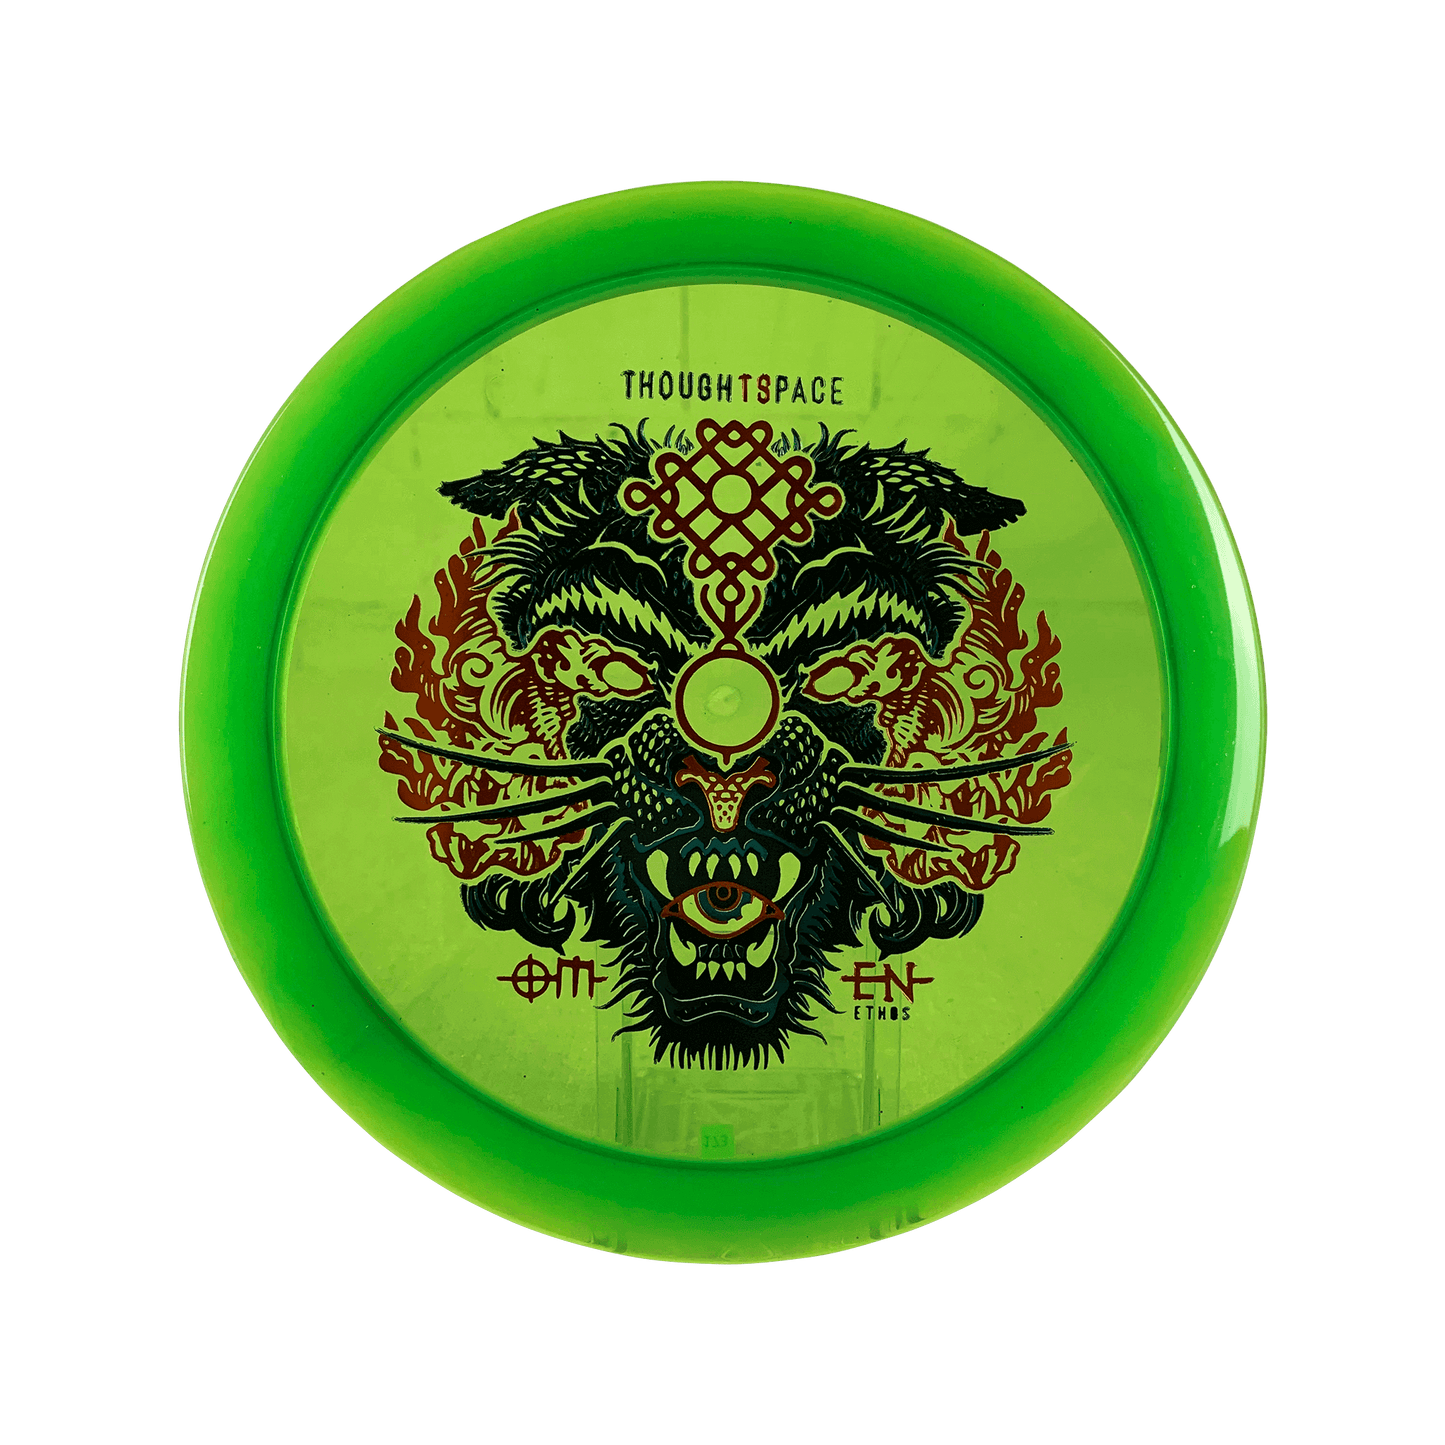 Ethos Omen Disc Thought Space Athletics bright green 173 